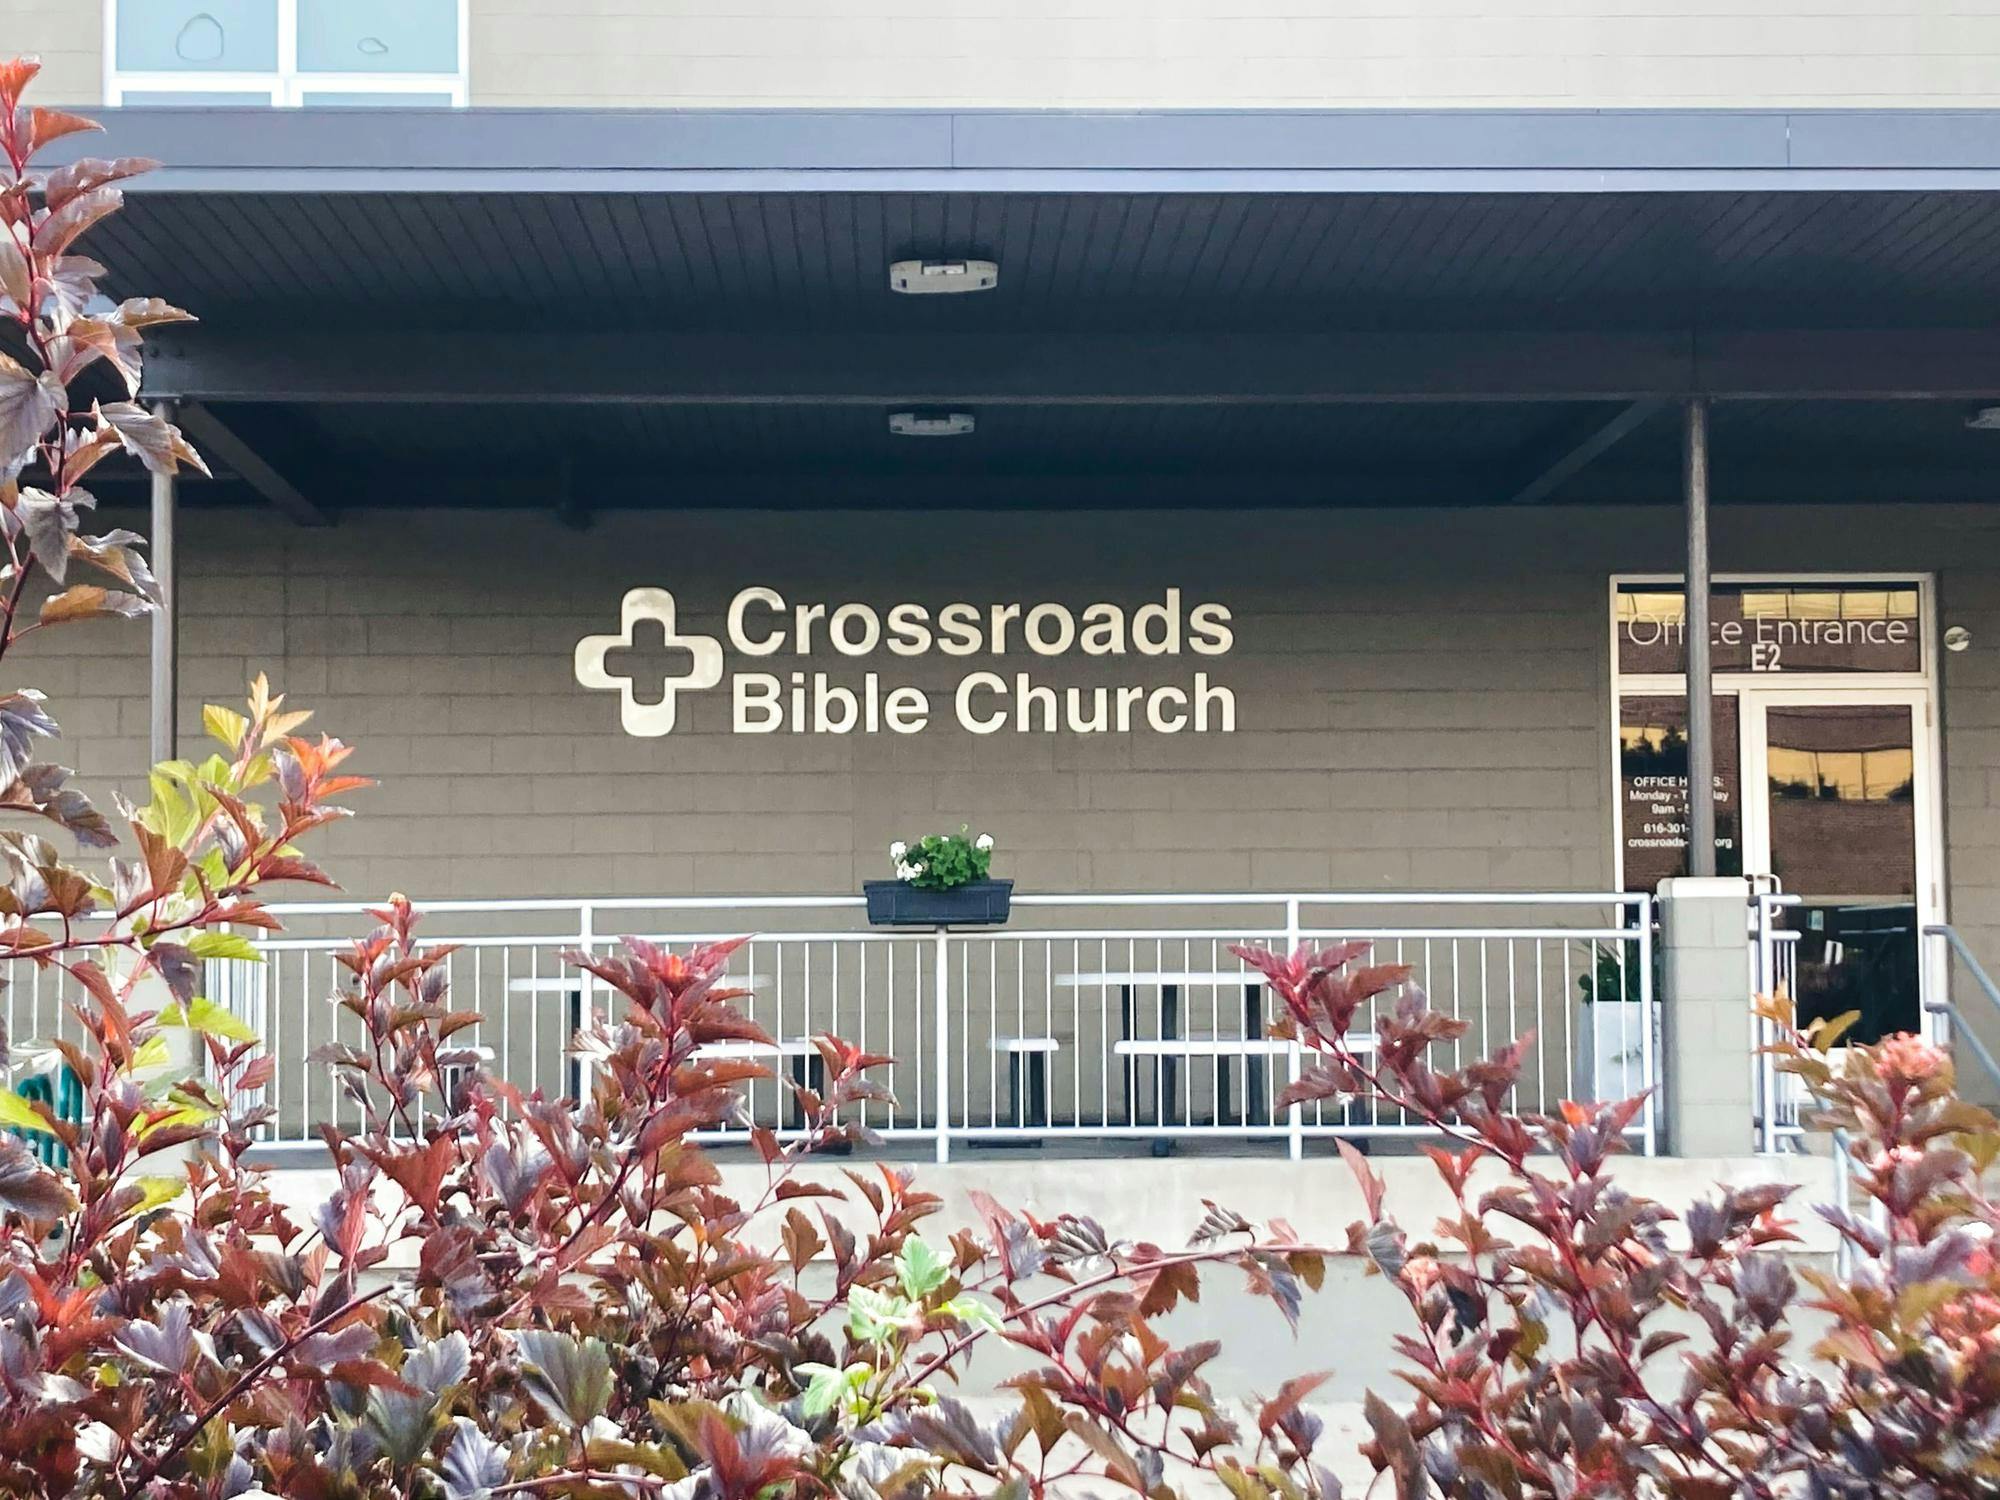 Composed of around 25 physicians and over 300 student volunteers, Grand Rapids Street Medicine partners with local outreach programs to set up pop-up clinics throughout Grand Rapids. Crossroads Bible Church is one of three venues. 